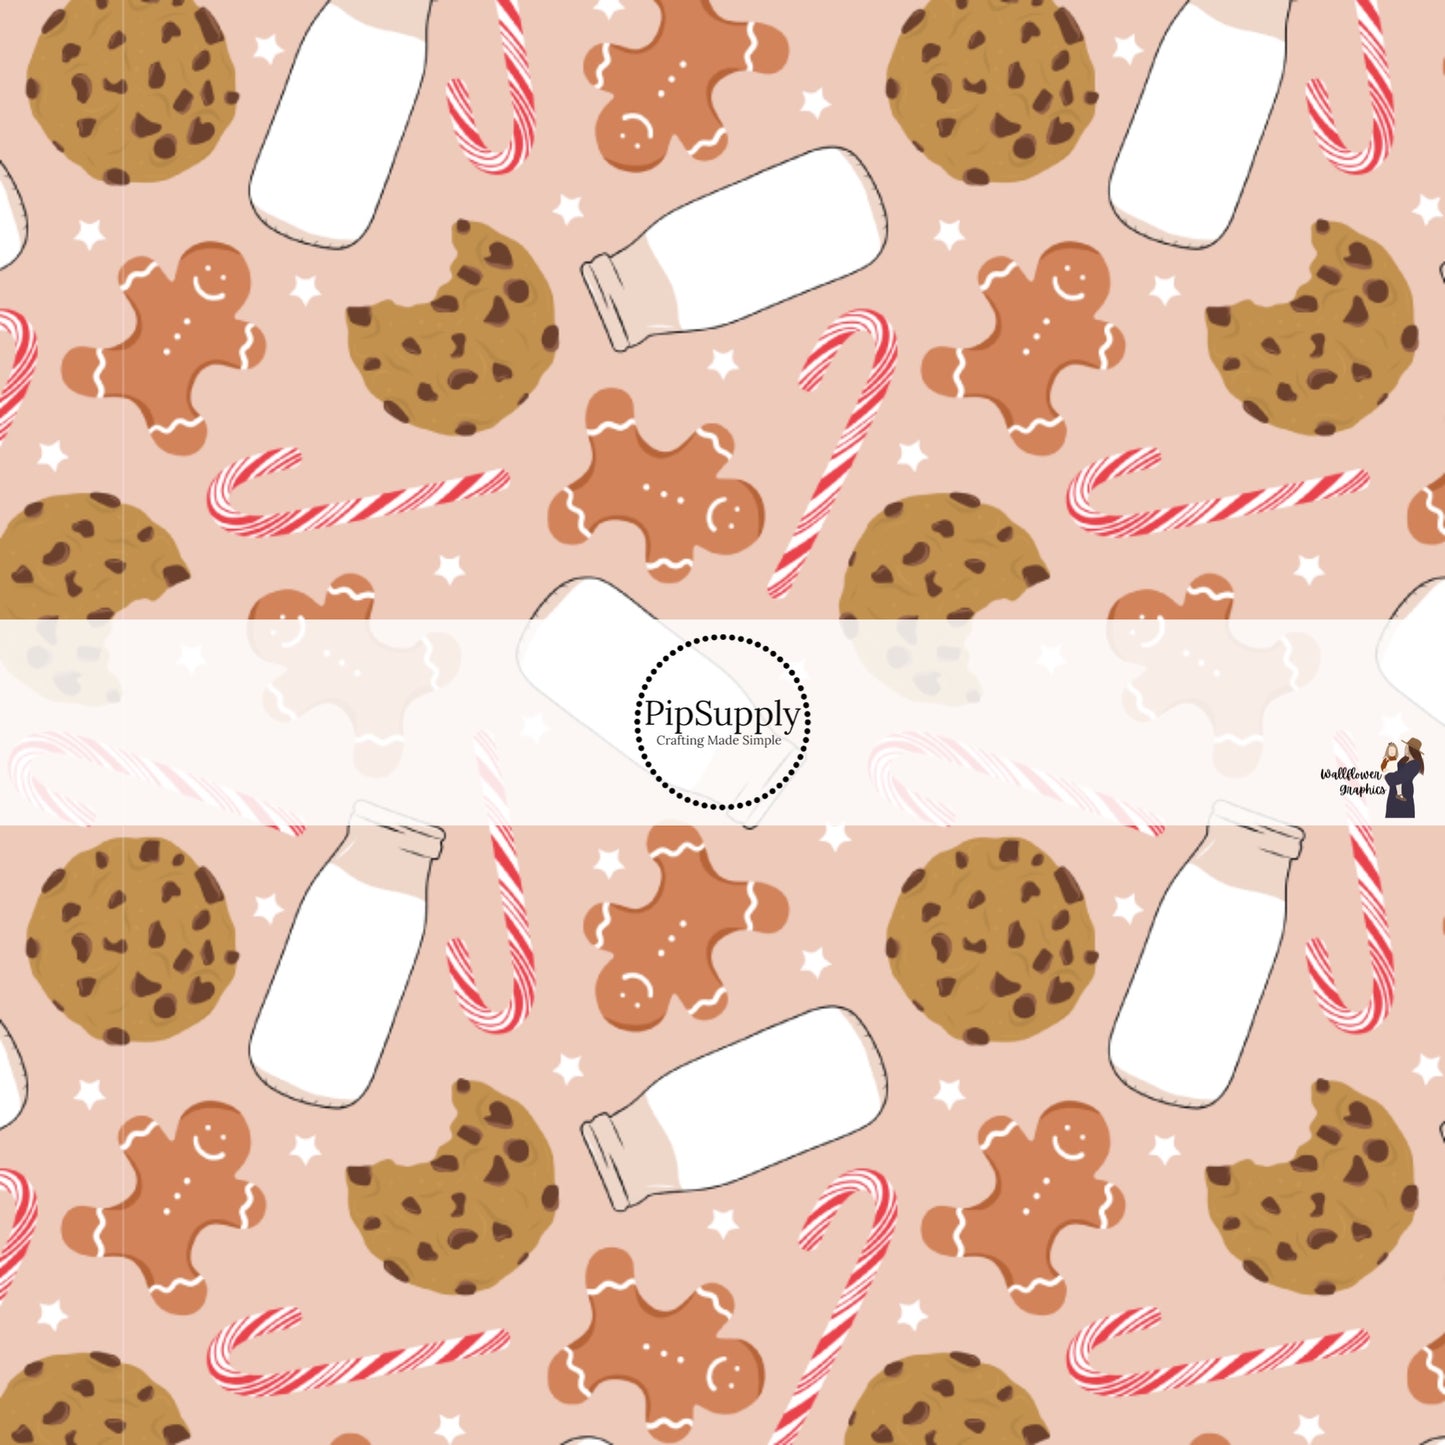 These holiday pattern themed fabric by the yard features iced gingerbread, chocolate chip cookies, candy canes, and milk on pink. This fun Christmas fabric can be used for all your sewing and crafting needs!